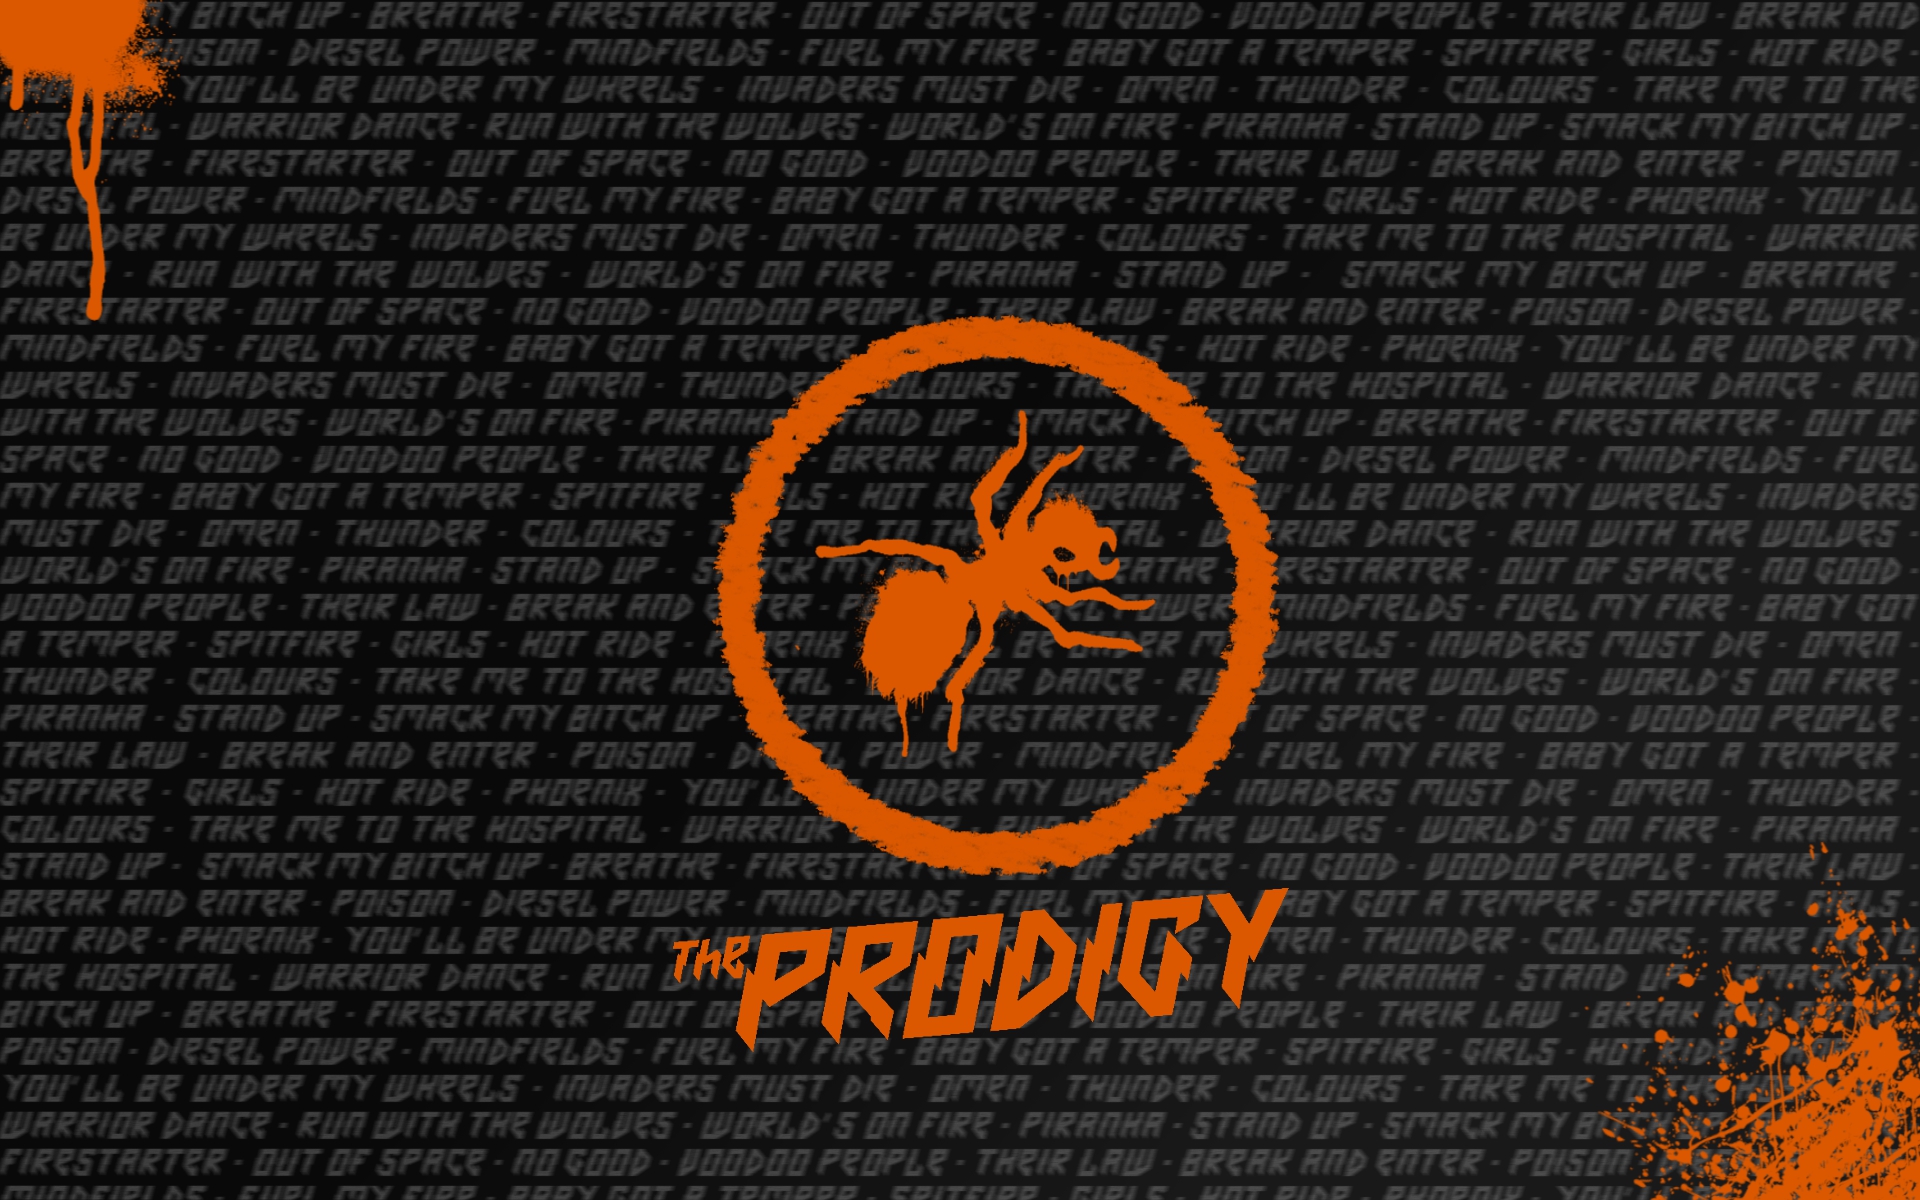 The Prodigy Wallpaper Fanmade by A3R0DYNAMIK on DeviantArt